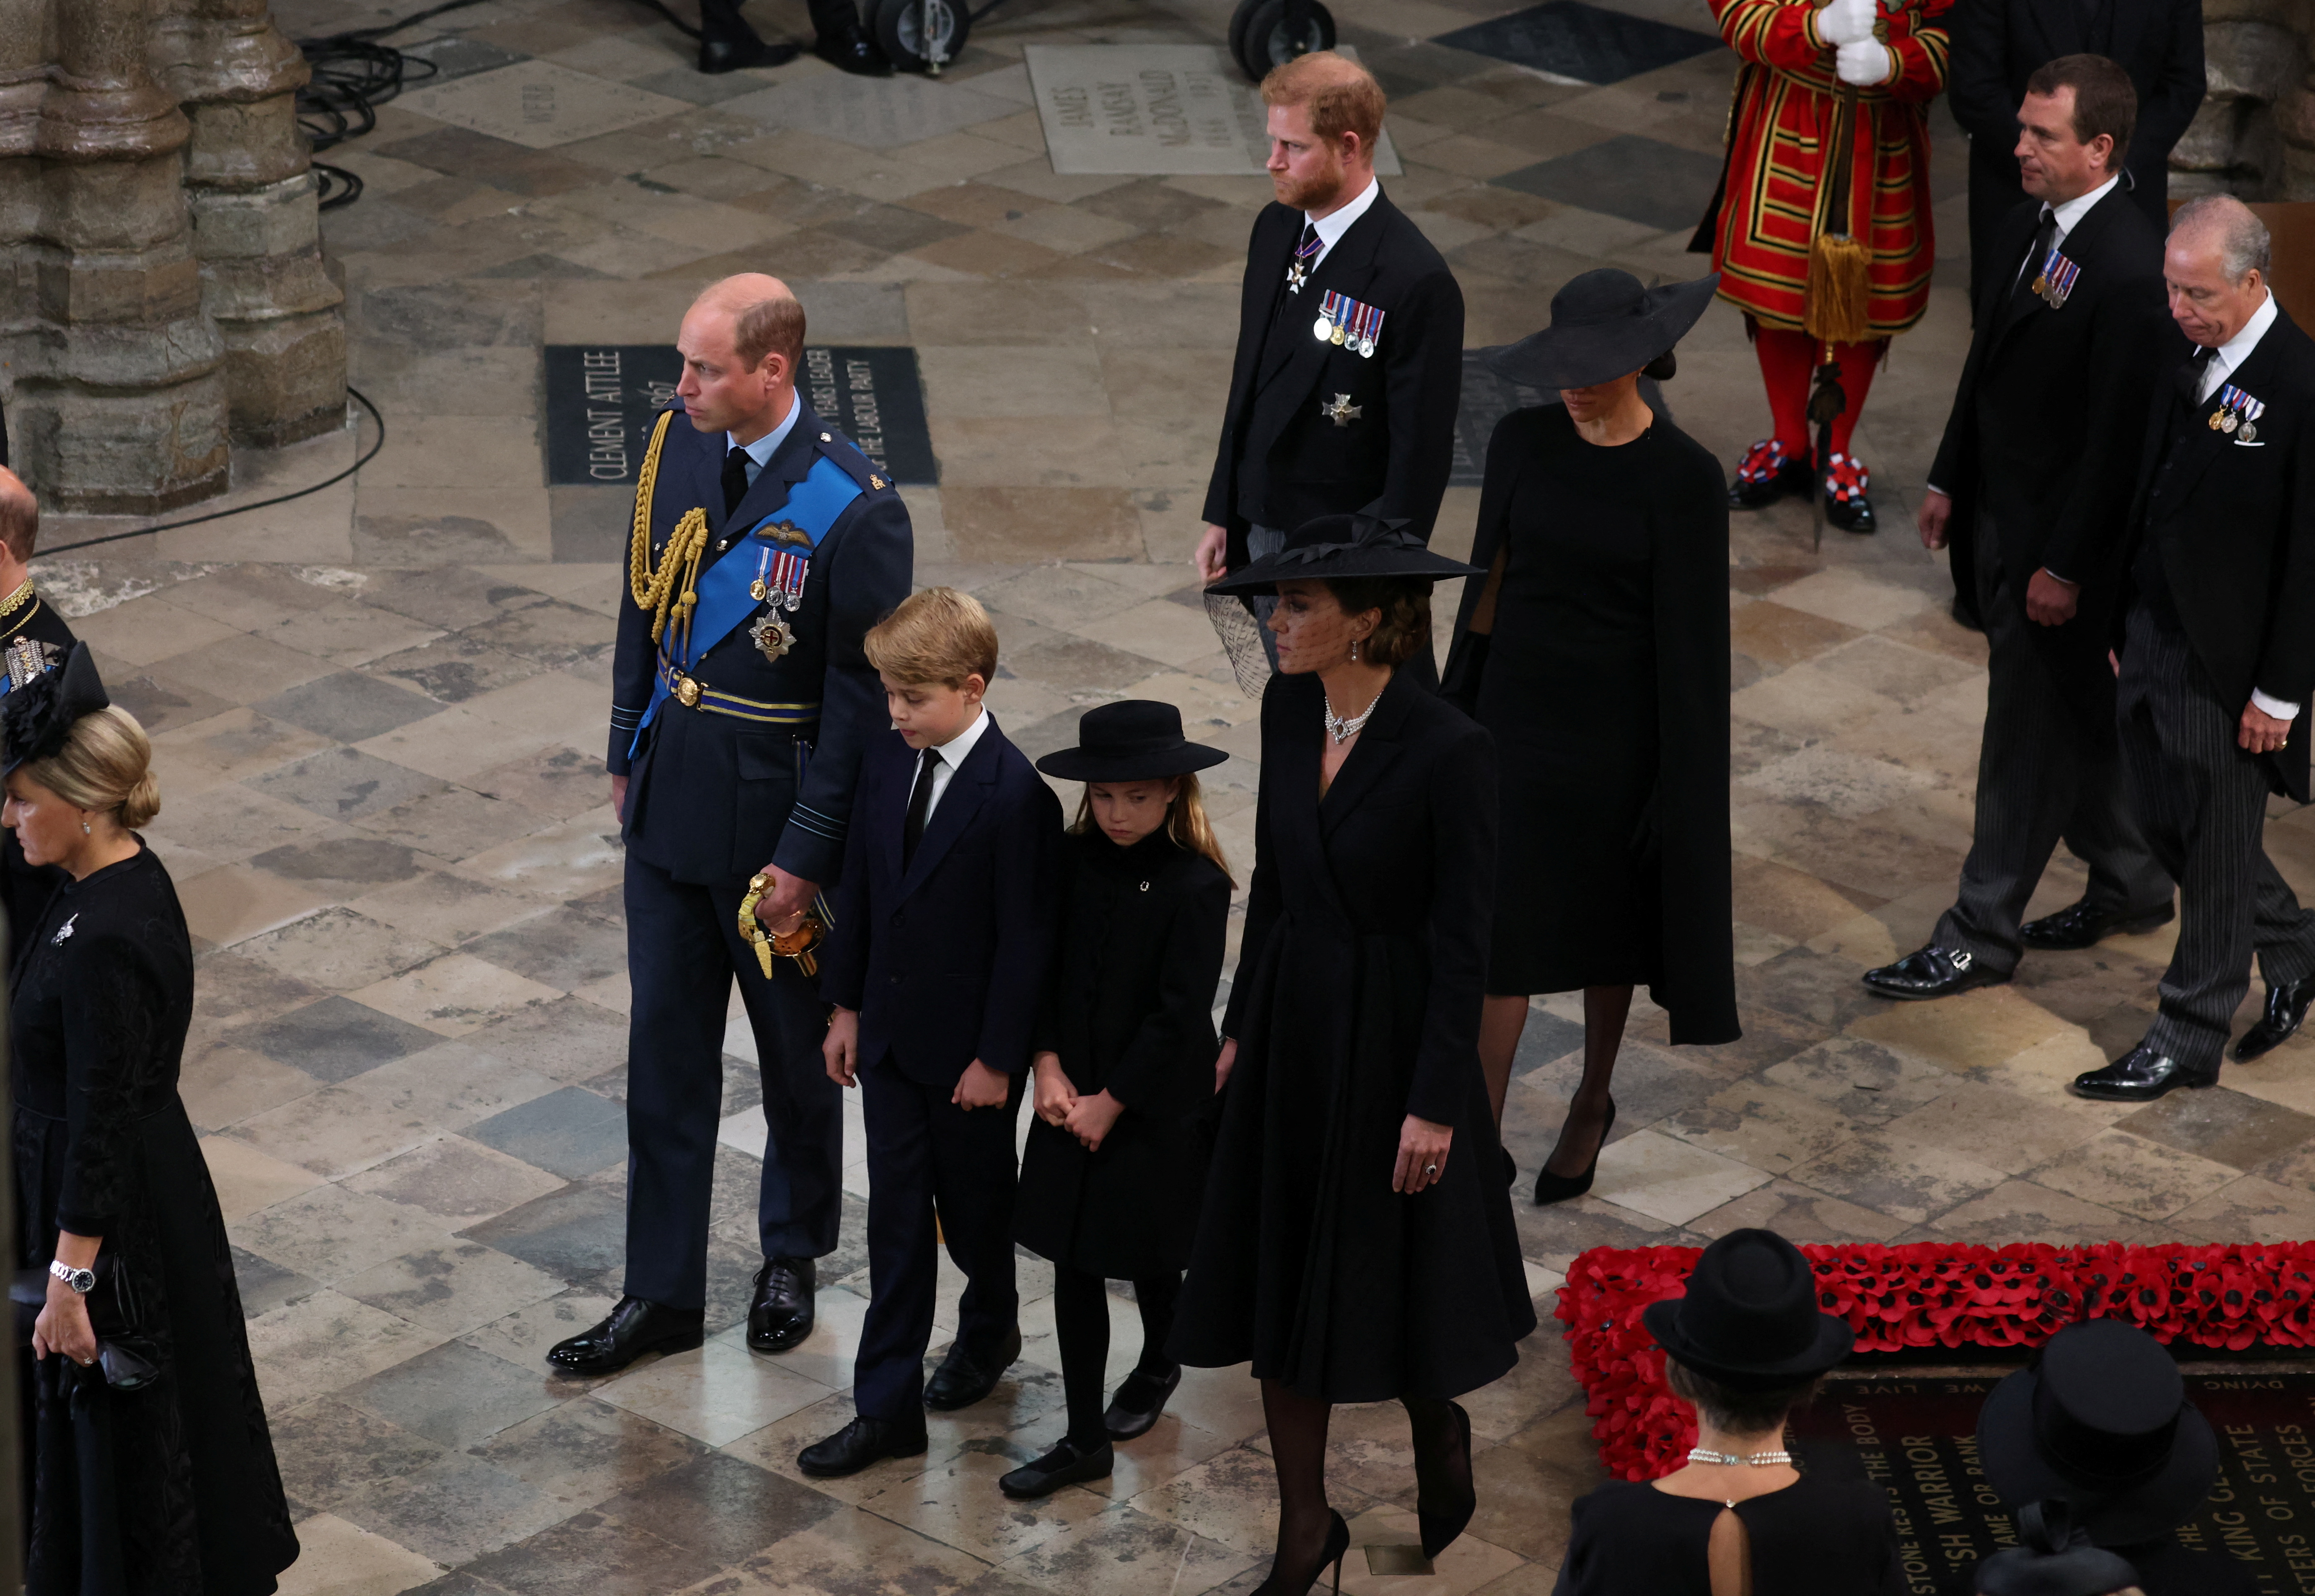 Prince William, Prince George, Princess Charlotte, Princess Catherine, Prince Harry, and Meghan Markle during the State Funeral of Queen Elizabeth II at Westminster Abbey on September 19, 2022 in London, England | Source: Getty Images